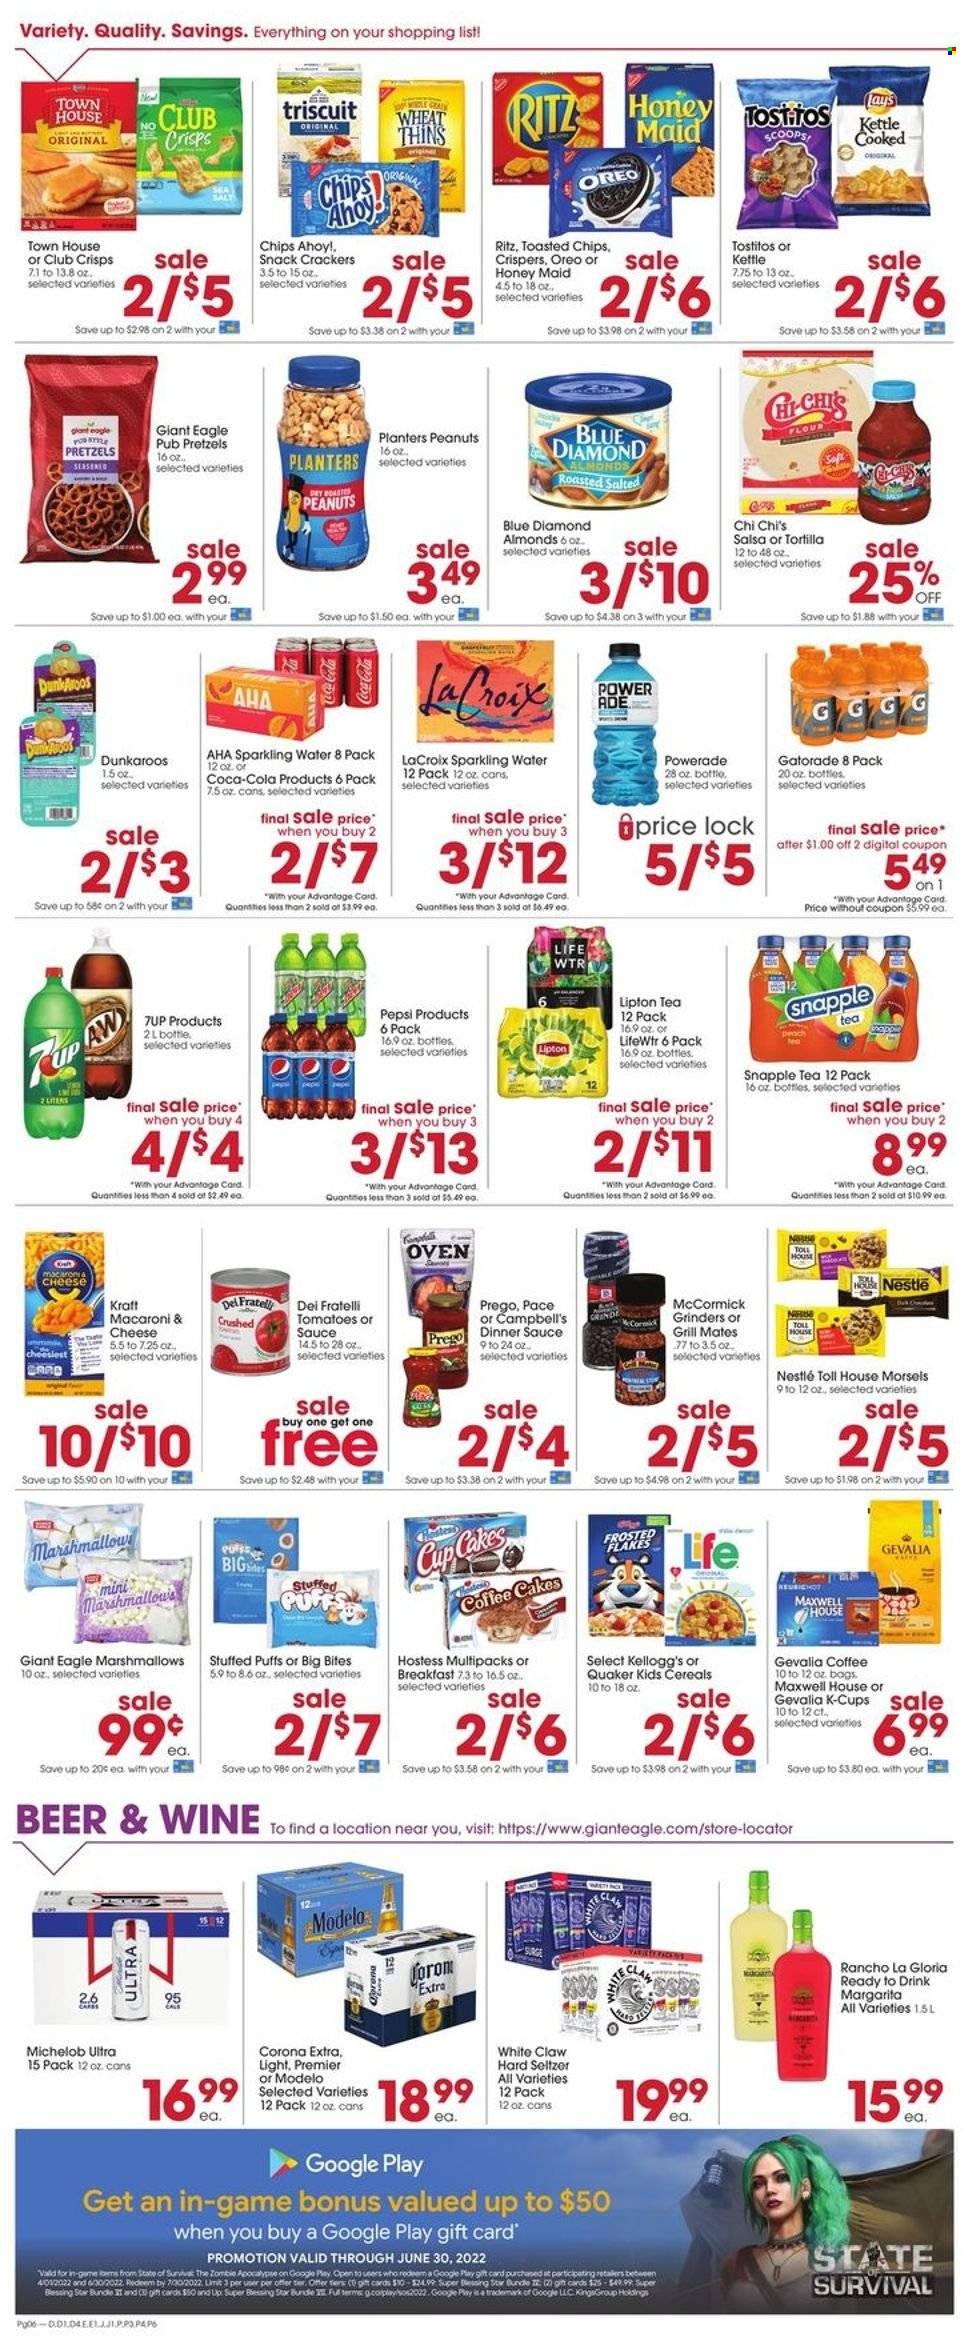 thumbnail - Giant Eagle Flyer - 05/26/2022 - 06/01/2022 - Sales products - tortillas, pretzels, puffs, tomatoes, Campbell's, macaroni & cheese, Quaker, Kraft®, marshmallows, Nestlé, snack, crackers, Kellogg's, Chips Ahoy!, RITZ, chips, Lay’s, Thins, Tostitos, cereals, Honey Maid, salsa, almonds, roasted peanuts, peanuts, Planters, Blue Diamond, Coca-Cola, Powerade, Pepsi, Lipton, 7UP, Snapple, Gatorade, sparkling water, Lifewtr, Maxwell House, tea, coffee capsules, K-Cups, Gevalia, White Claw, Hard Seltzer, beer, Corona Extra, Modelo, Michelob. Page 6.